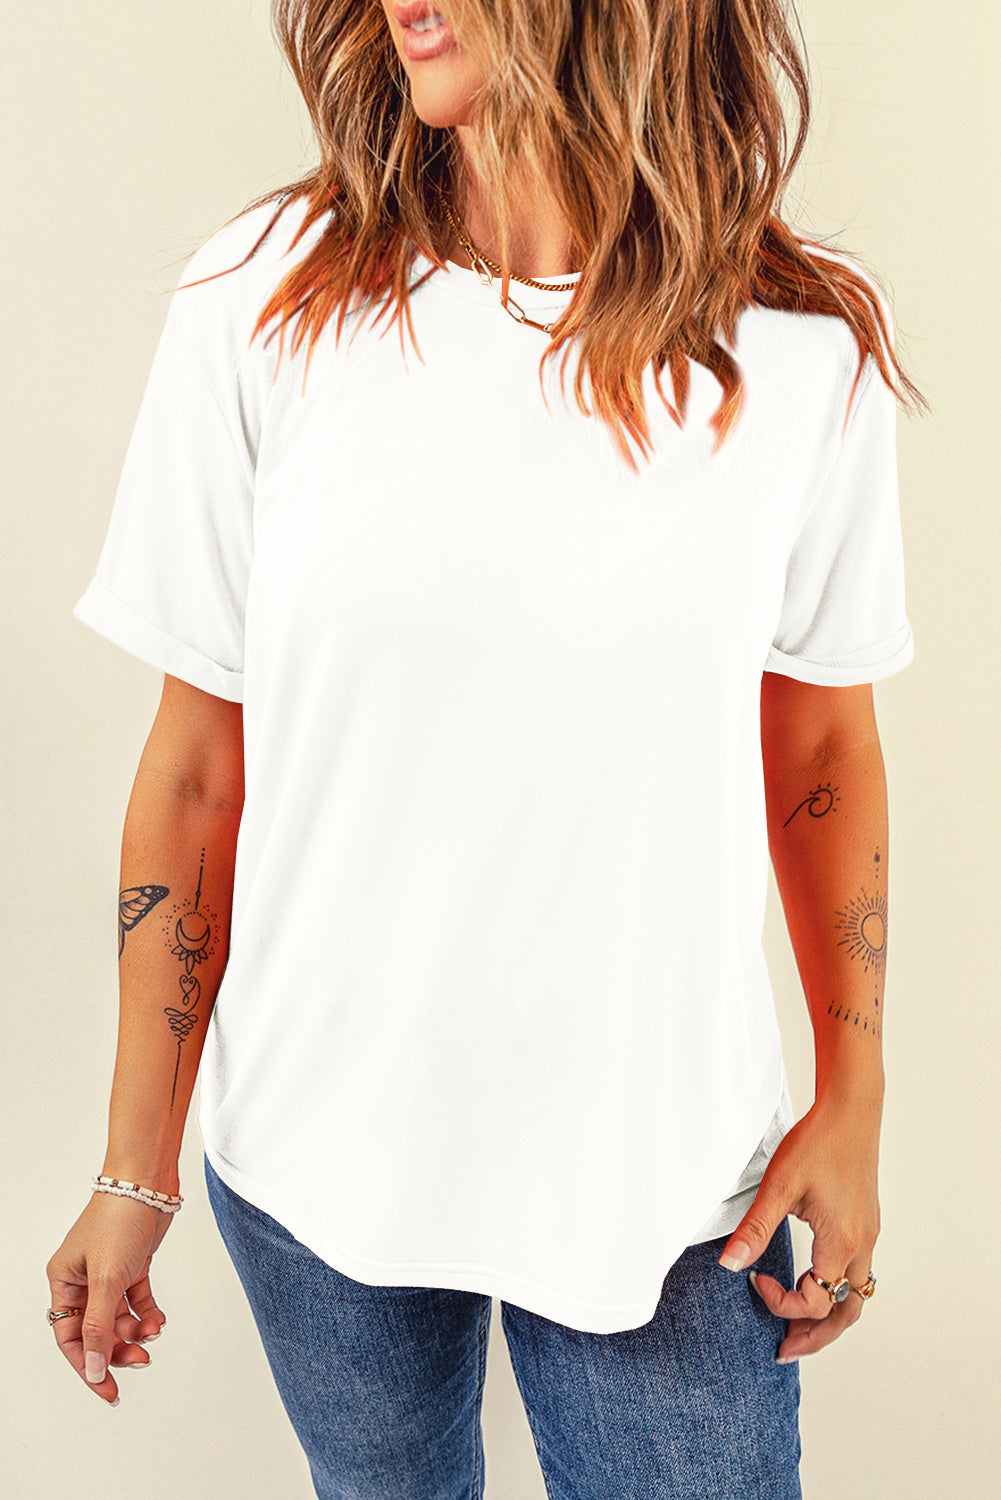 Round Neck Short Sleeve T-Shirt Wild Willows Boutique NY – Massapequa, New York. Affordable and fashionable clothing for women of all ages. Bottoms, tops, dresses, intimates, outerwear, sweaters, shoes, accessories, jewelry, activewear and more//wild Willow Boutique